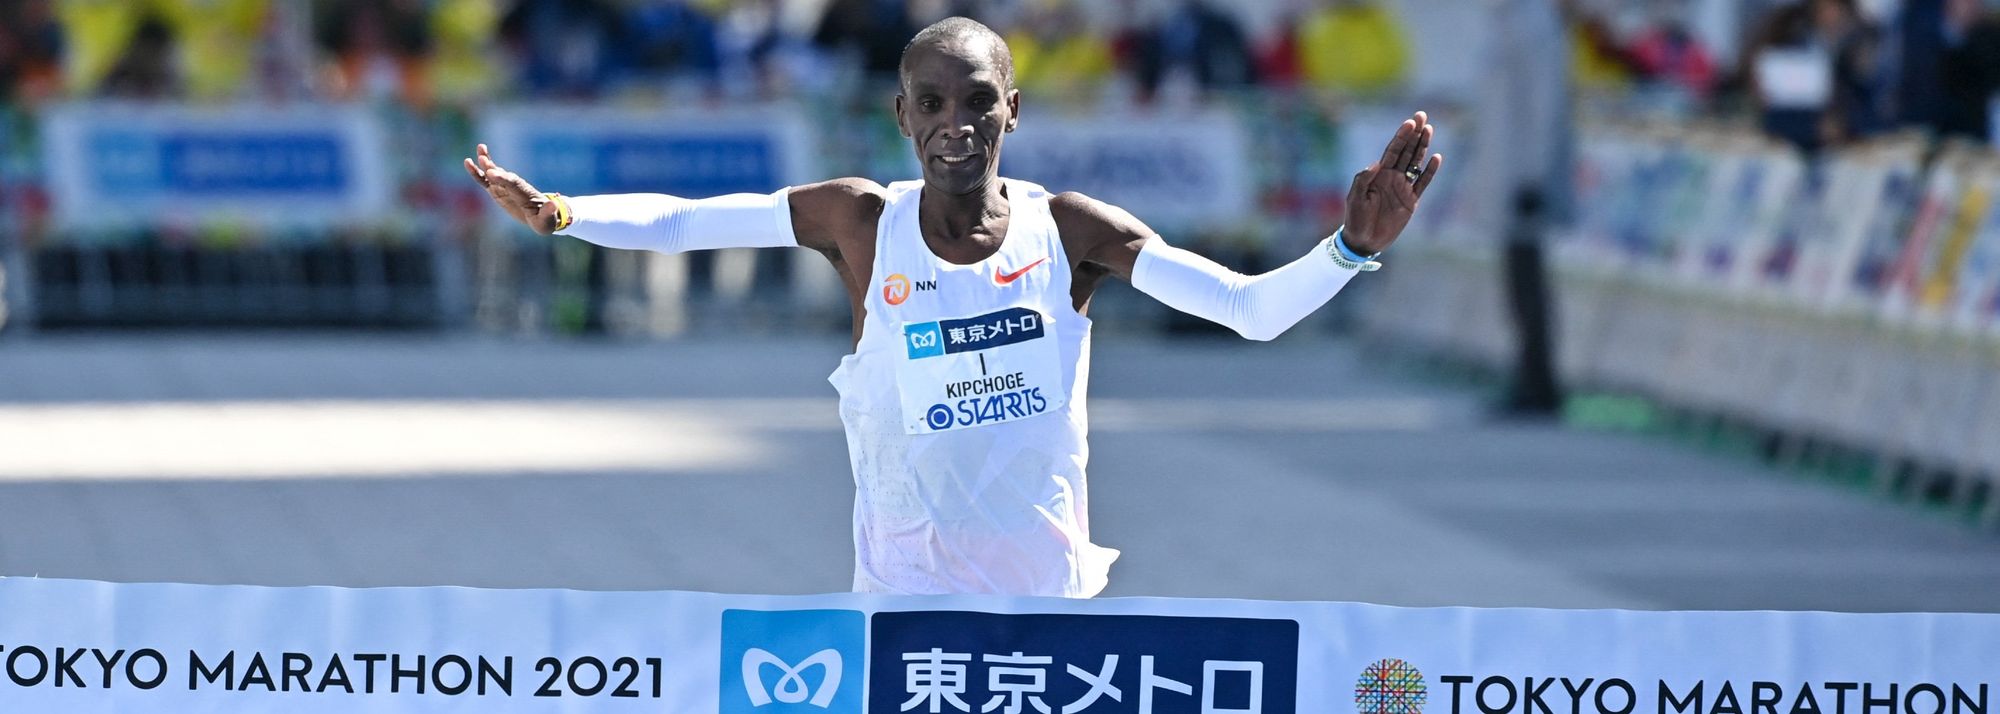 The two-time Olympic gold medallists will be up against the world champions as well as the defending Tokyo Marathon champions.